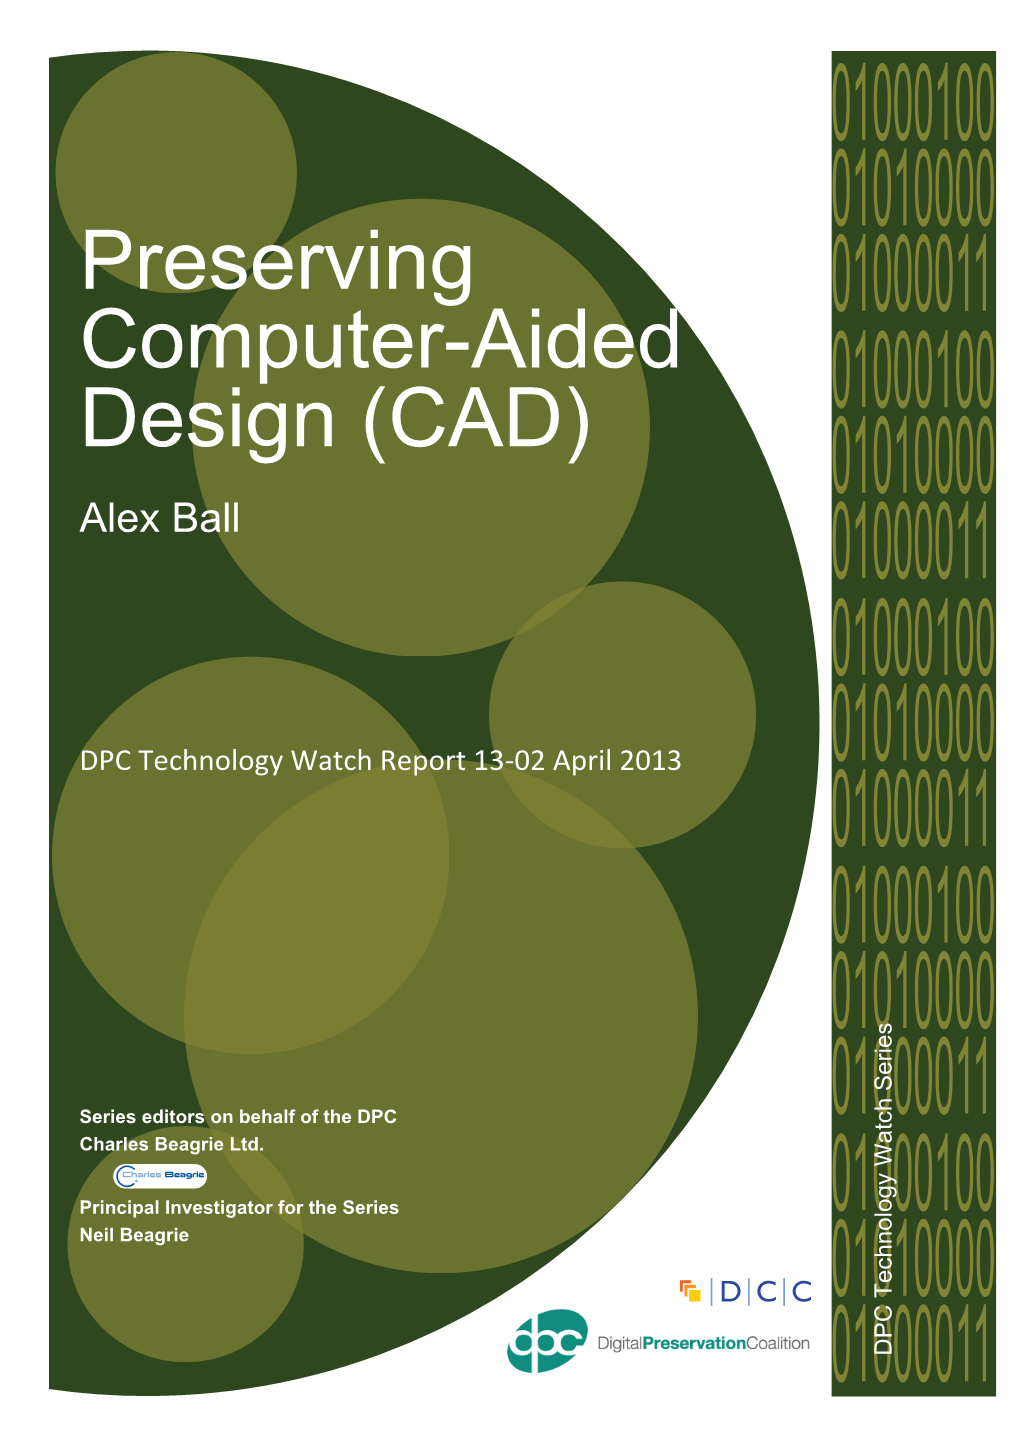 Preserving Computer-Aided Design (CAD)